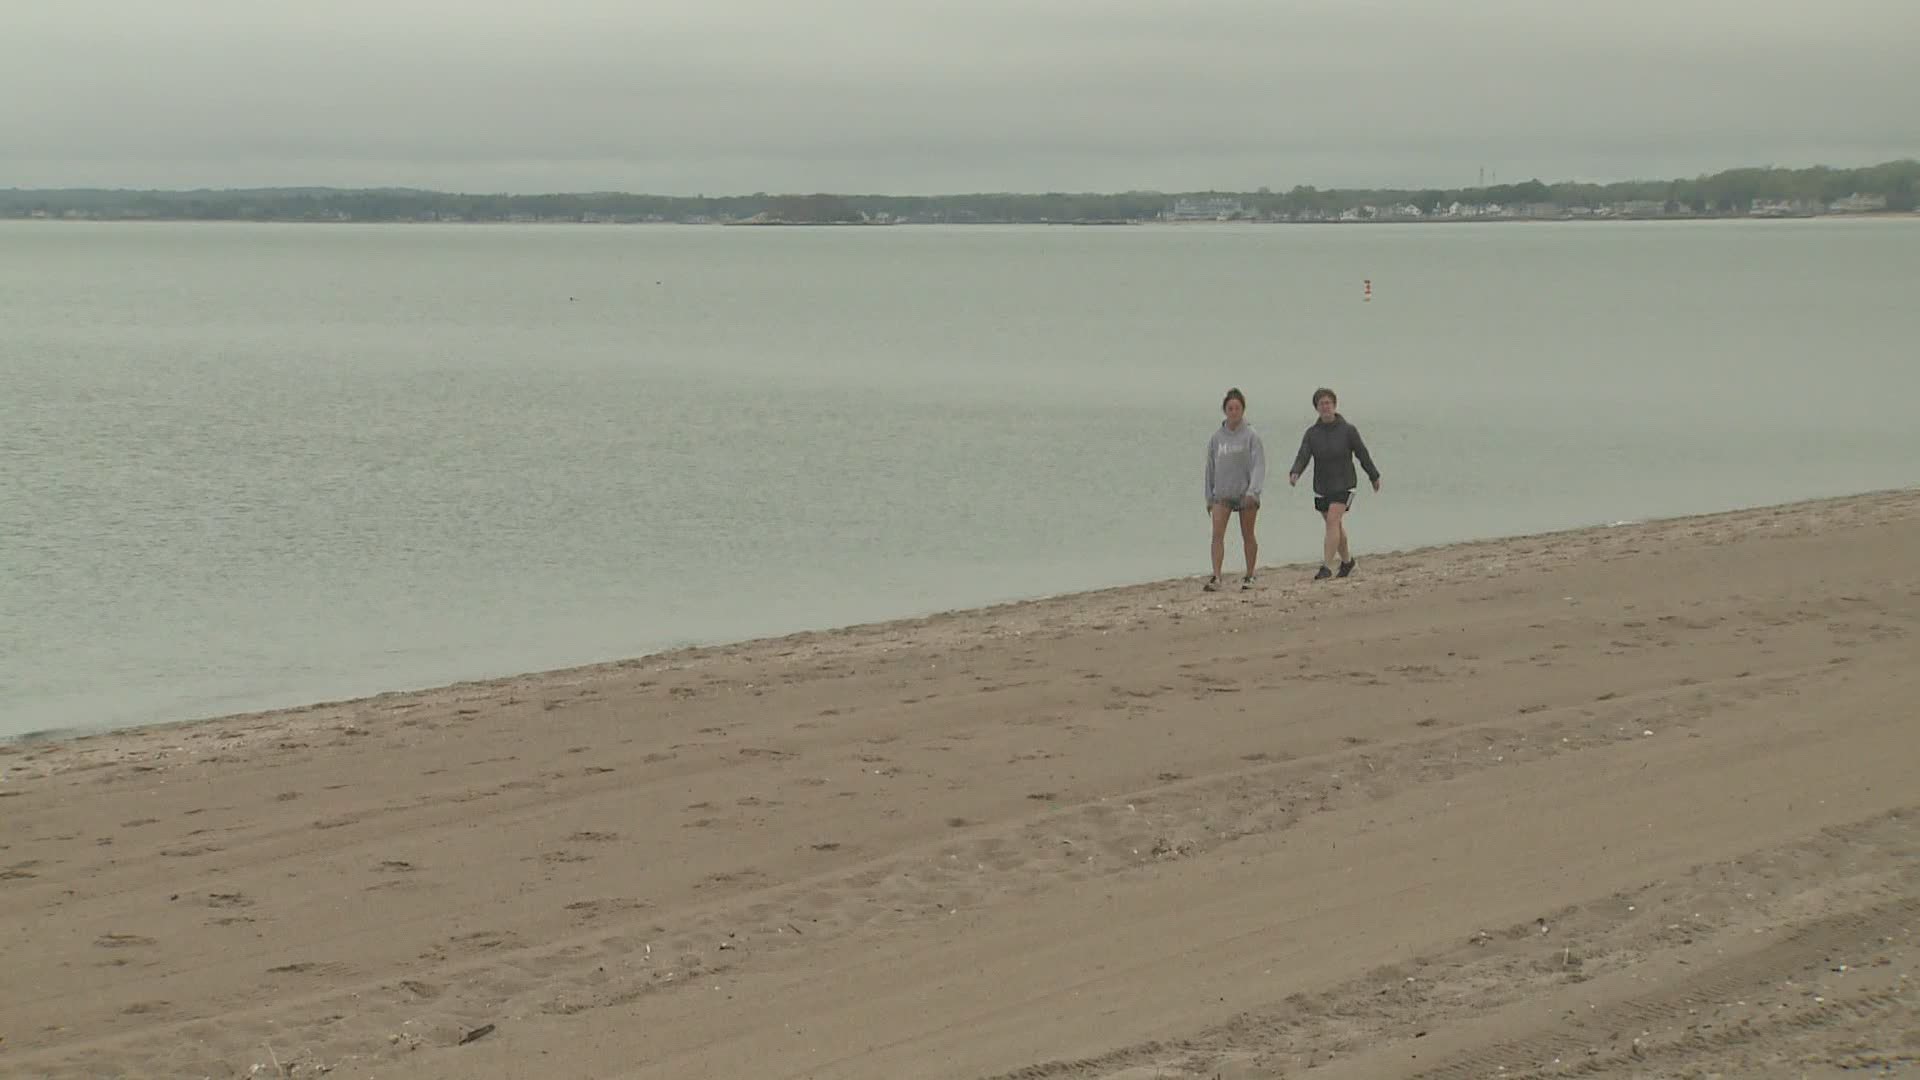 A cloudy morning didn’t stop people from coming out to state beaches for one of the busiest beach days of the year.